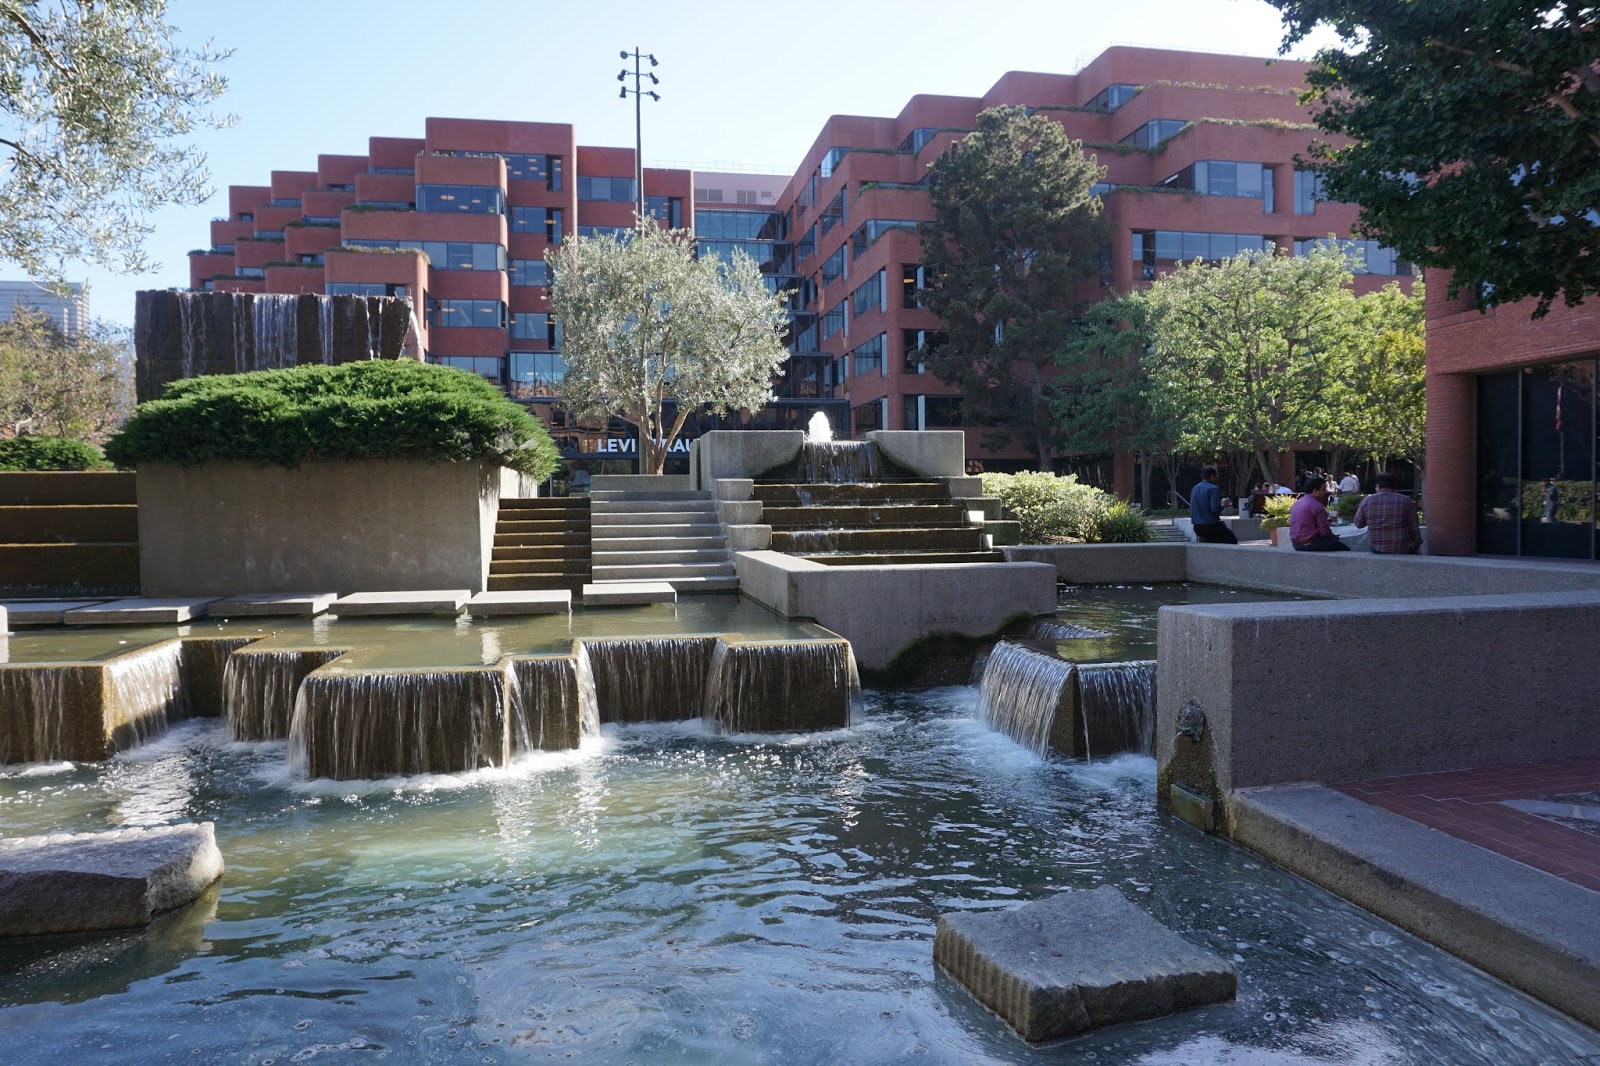 California Historical Society: The Sierra in the City: Lawrence Halprin and  Levi's Plaza